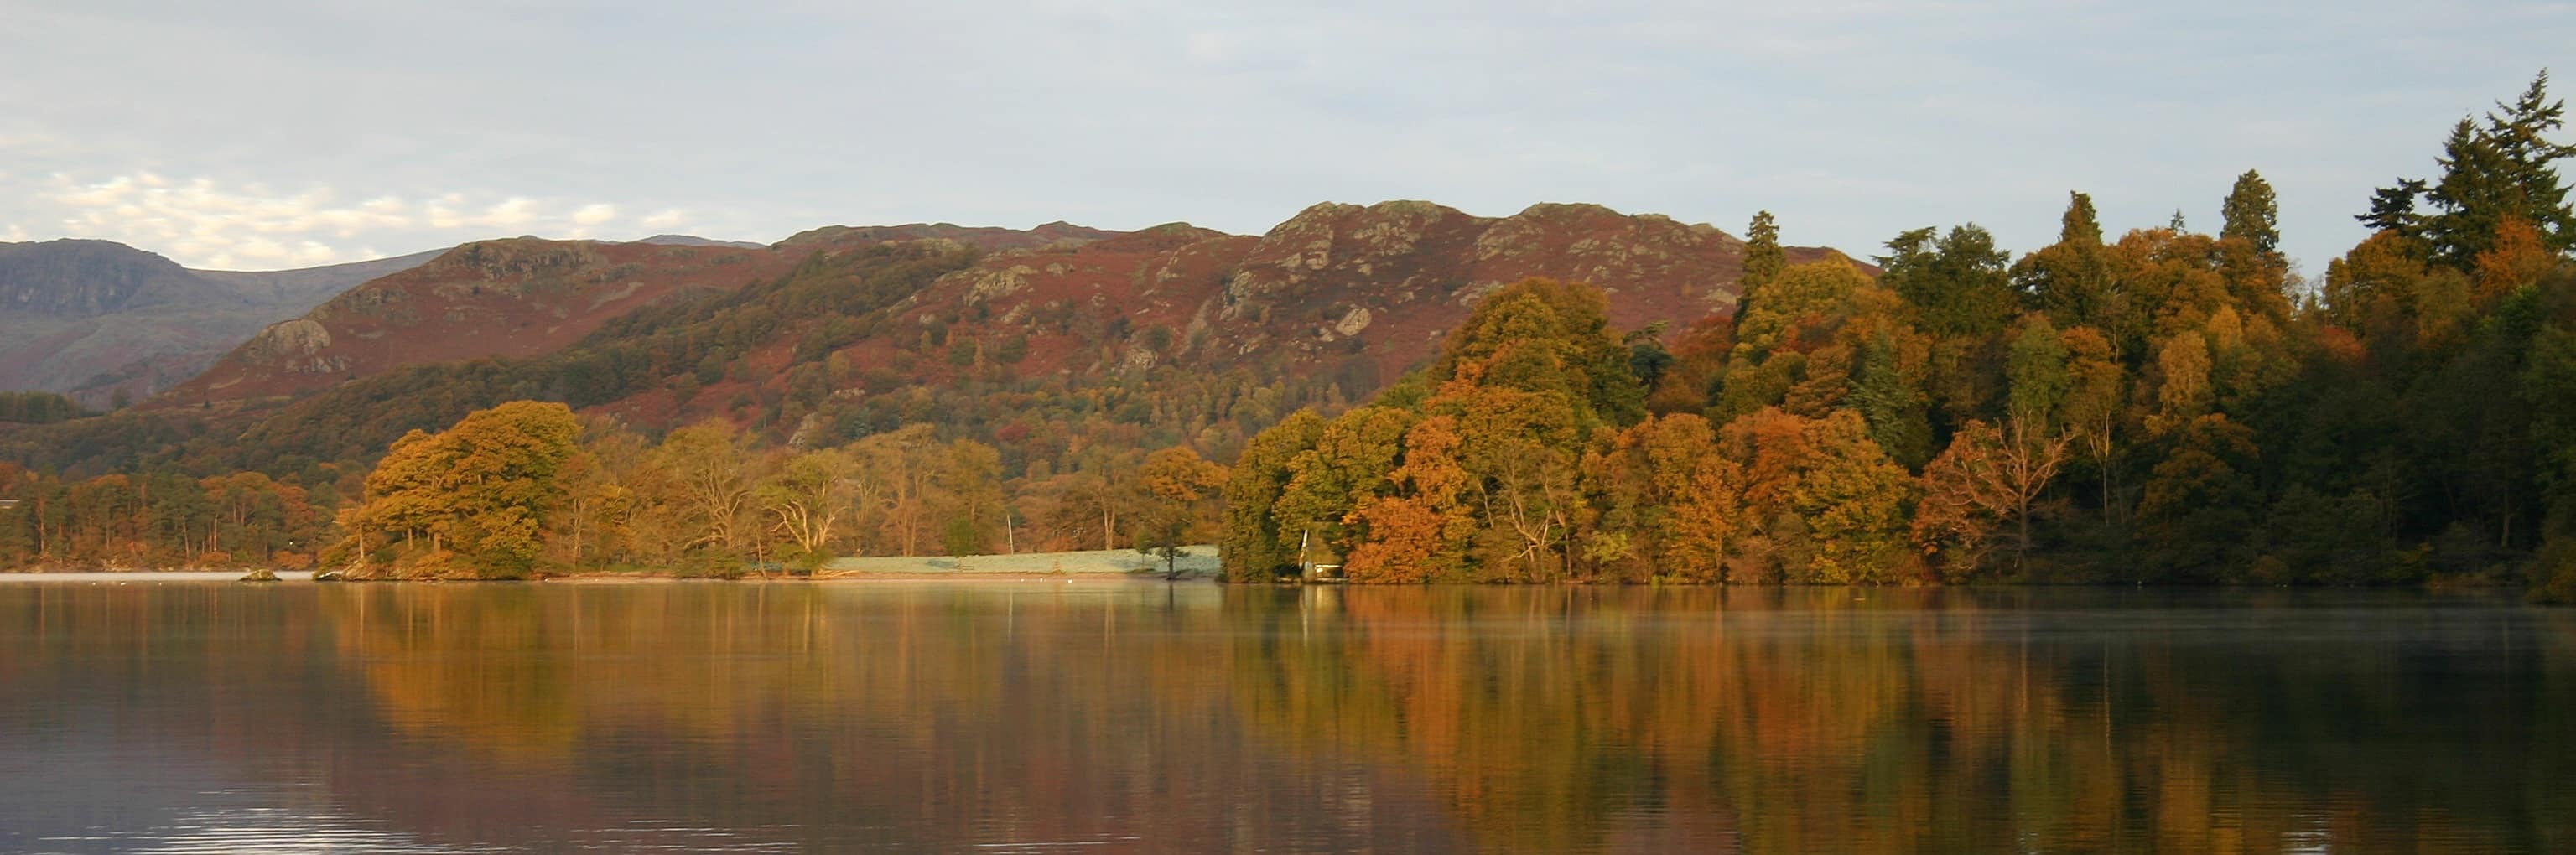 Handy tips about cottages to rent in the Lake District